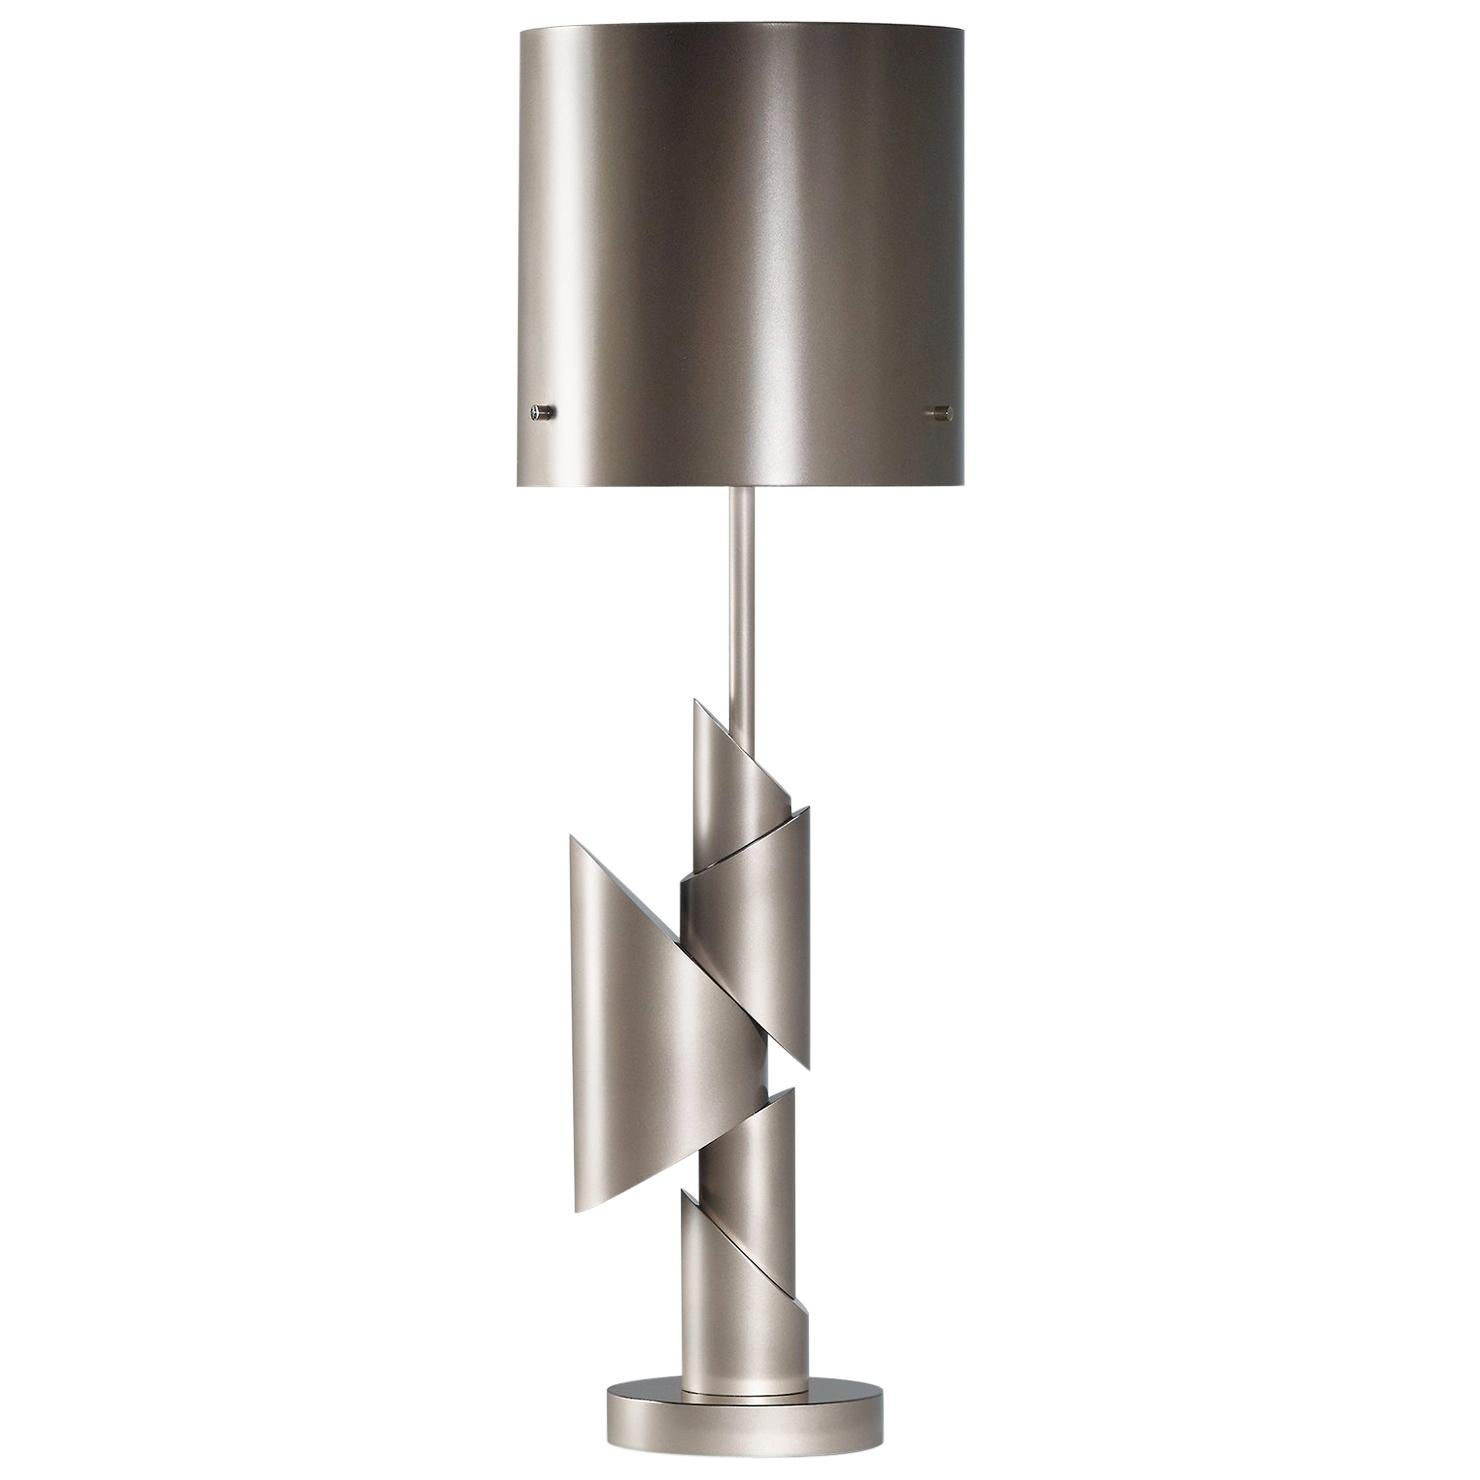 KRS III Table Lamp with Sandblasted and Mirror Polished Nickel Finish